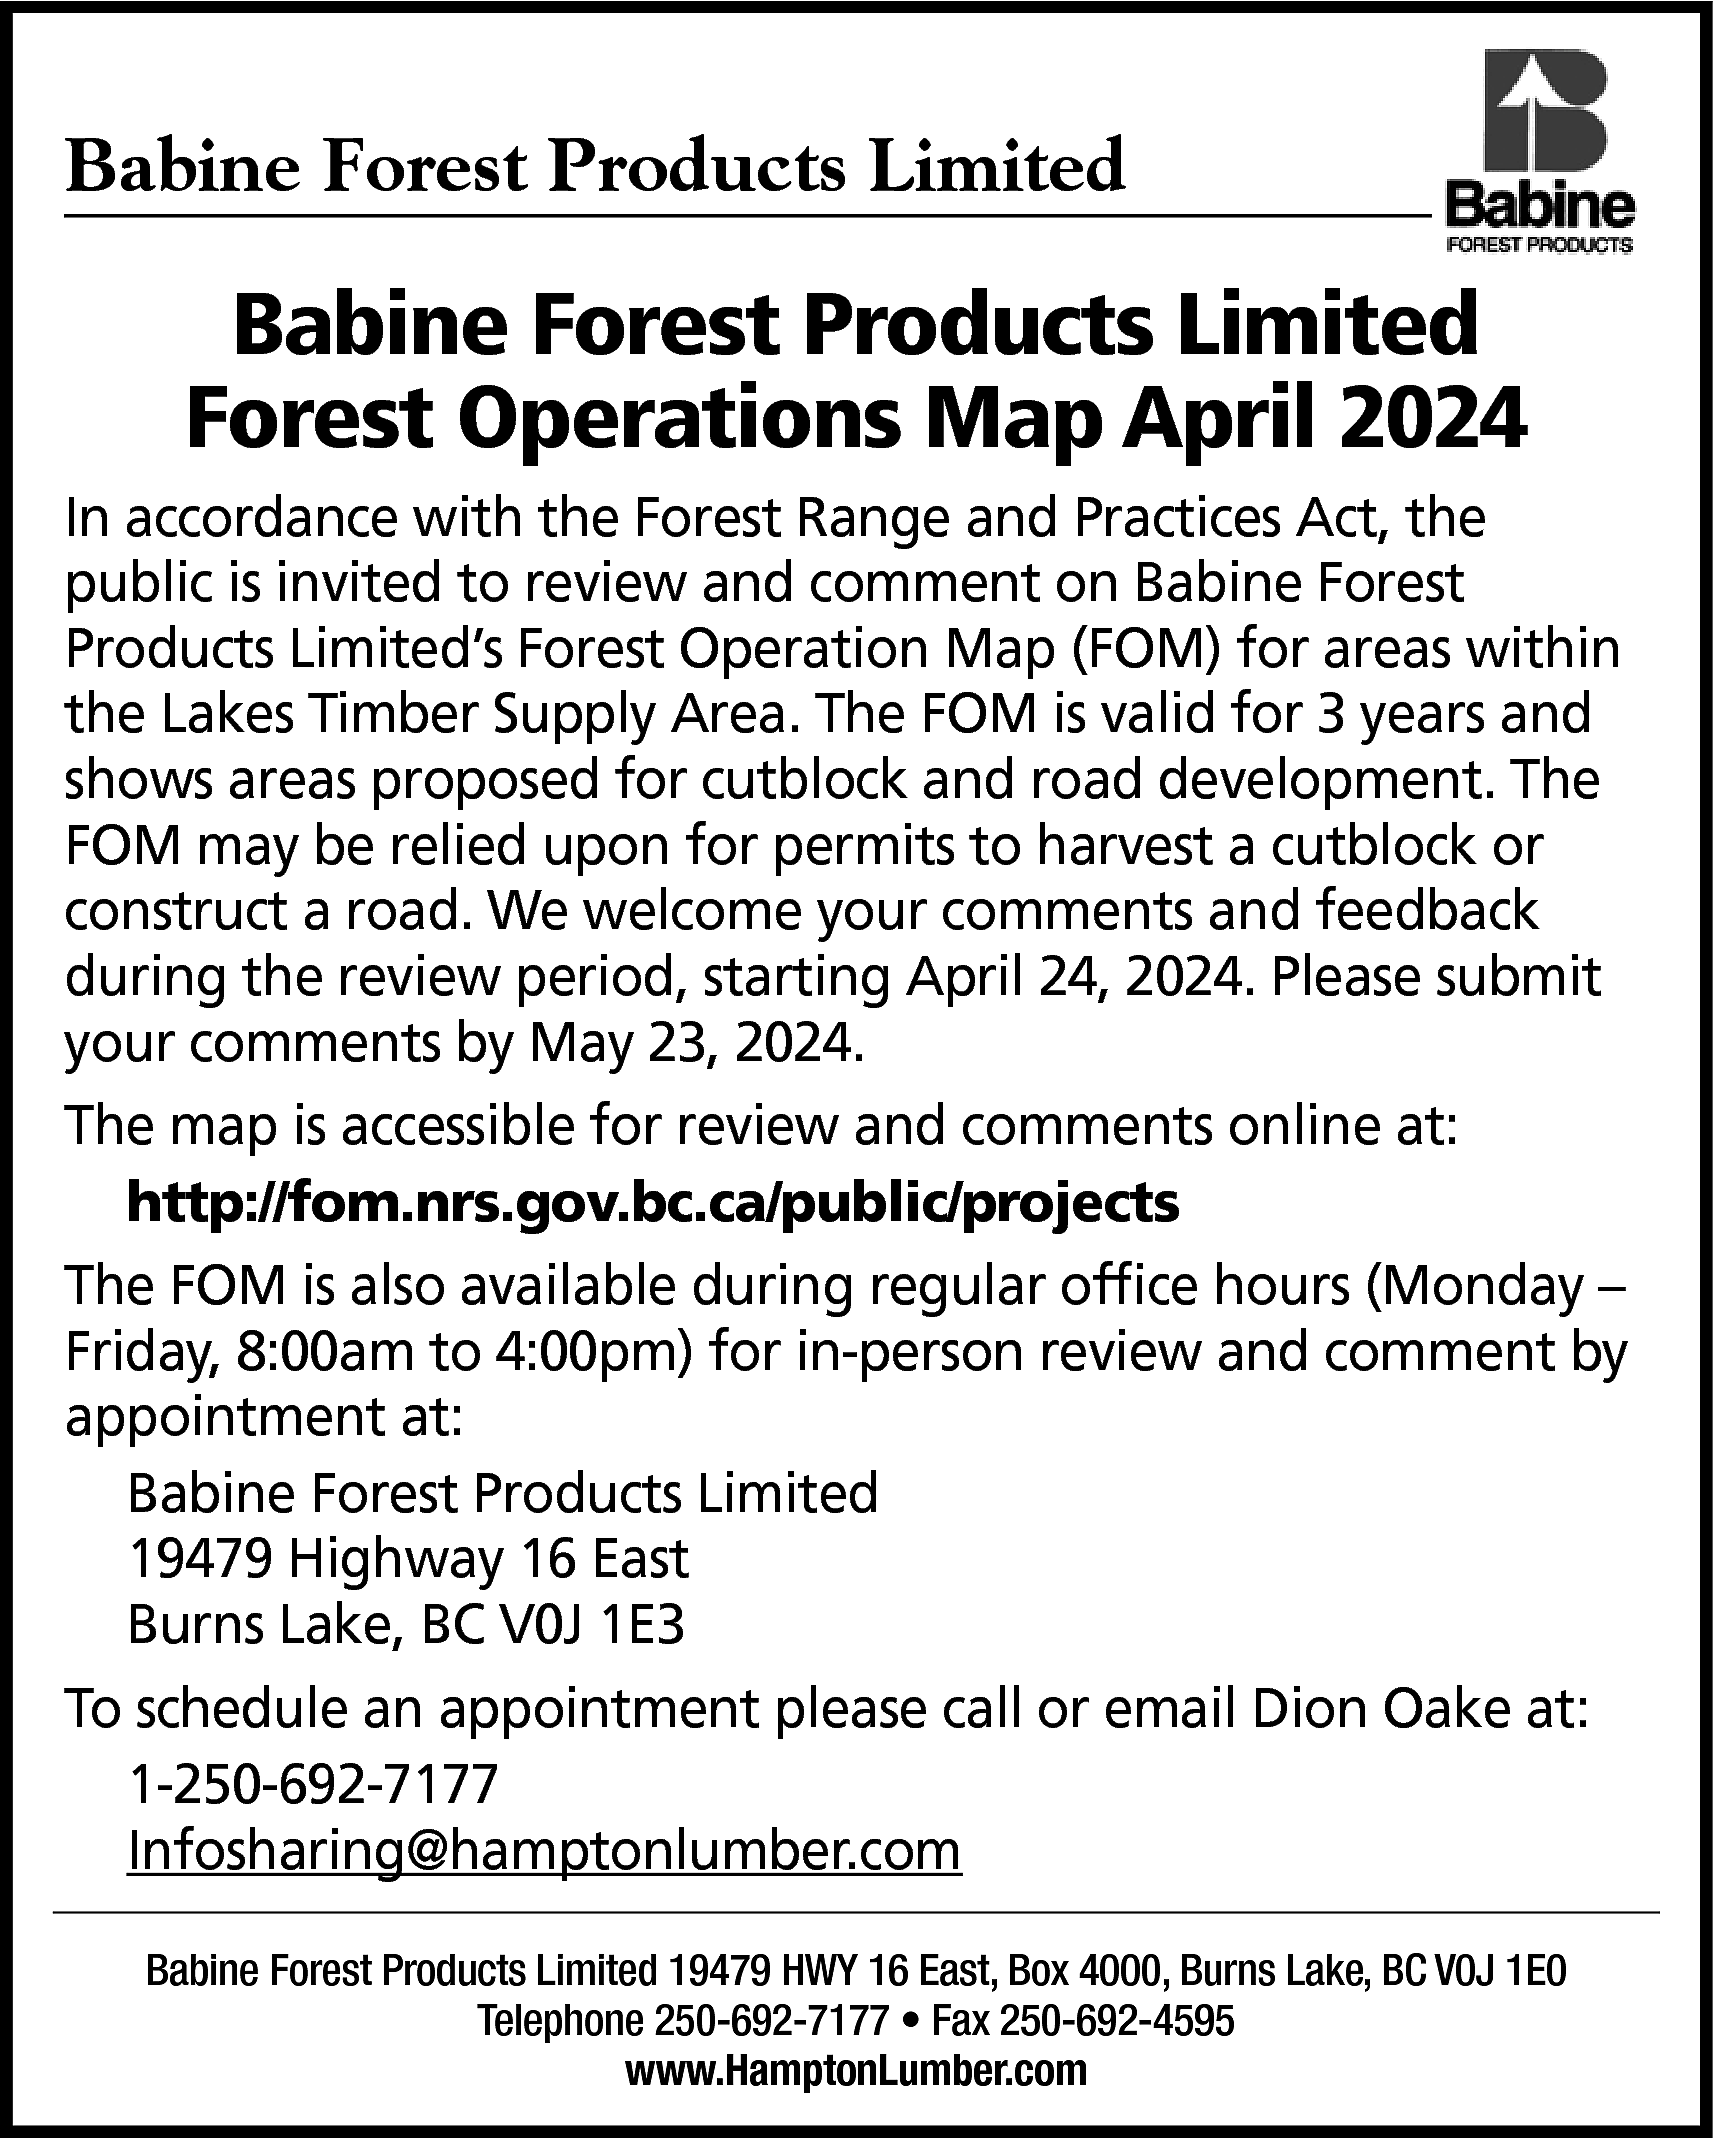 Babine Forest Products Limited <br>  Babine Forest Products Limited    Babine Forest Products Limited  Forest Operations Map April 2024  In accordance with the Forest Range and Practices Act, the  public is invited to review and comment on Babine Forest  Products Limited’s Forest Operation Map (FOM) for areas within  the Lakes Timber Supply Area. The FOM is valid for 3 years and  shows areas proposed for cutblock and road development. The  FOM may be relied upon for permits to harvest a cutblock or  construct a road. We welcome your comments and feedback  during the review period, starting April 24, 2024. Please submit  your comments by May 23, 2024.  The map is accessible for review and comments online at:  http://fom.nrs.gov.bc.ca/public/projects  The FOM is also available during regular office hours (Monday –  Friday, 8:00am to 4:00pm) for in-person review and comment by  appointment at:  Babine Forest Products Limited  19479 Highway 16 East  Burns Lake, BC V0J 1E3  To schedule an appointment please call or email Dion Oake at:  1-250-692-7177  Infosharing@hamptonlumber.com  Babine Forest Products Limited 19479 HWY 16 East, Box 4000, Burns Lake, BC V0J 1E0  Telephone 250-692-7177 • Fax 250-692-4595  www.HamptonLumber.com    